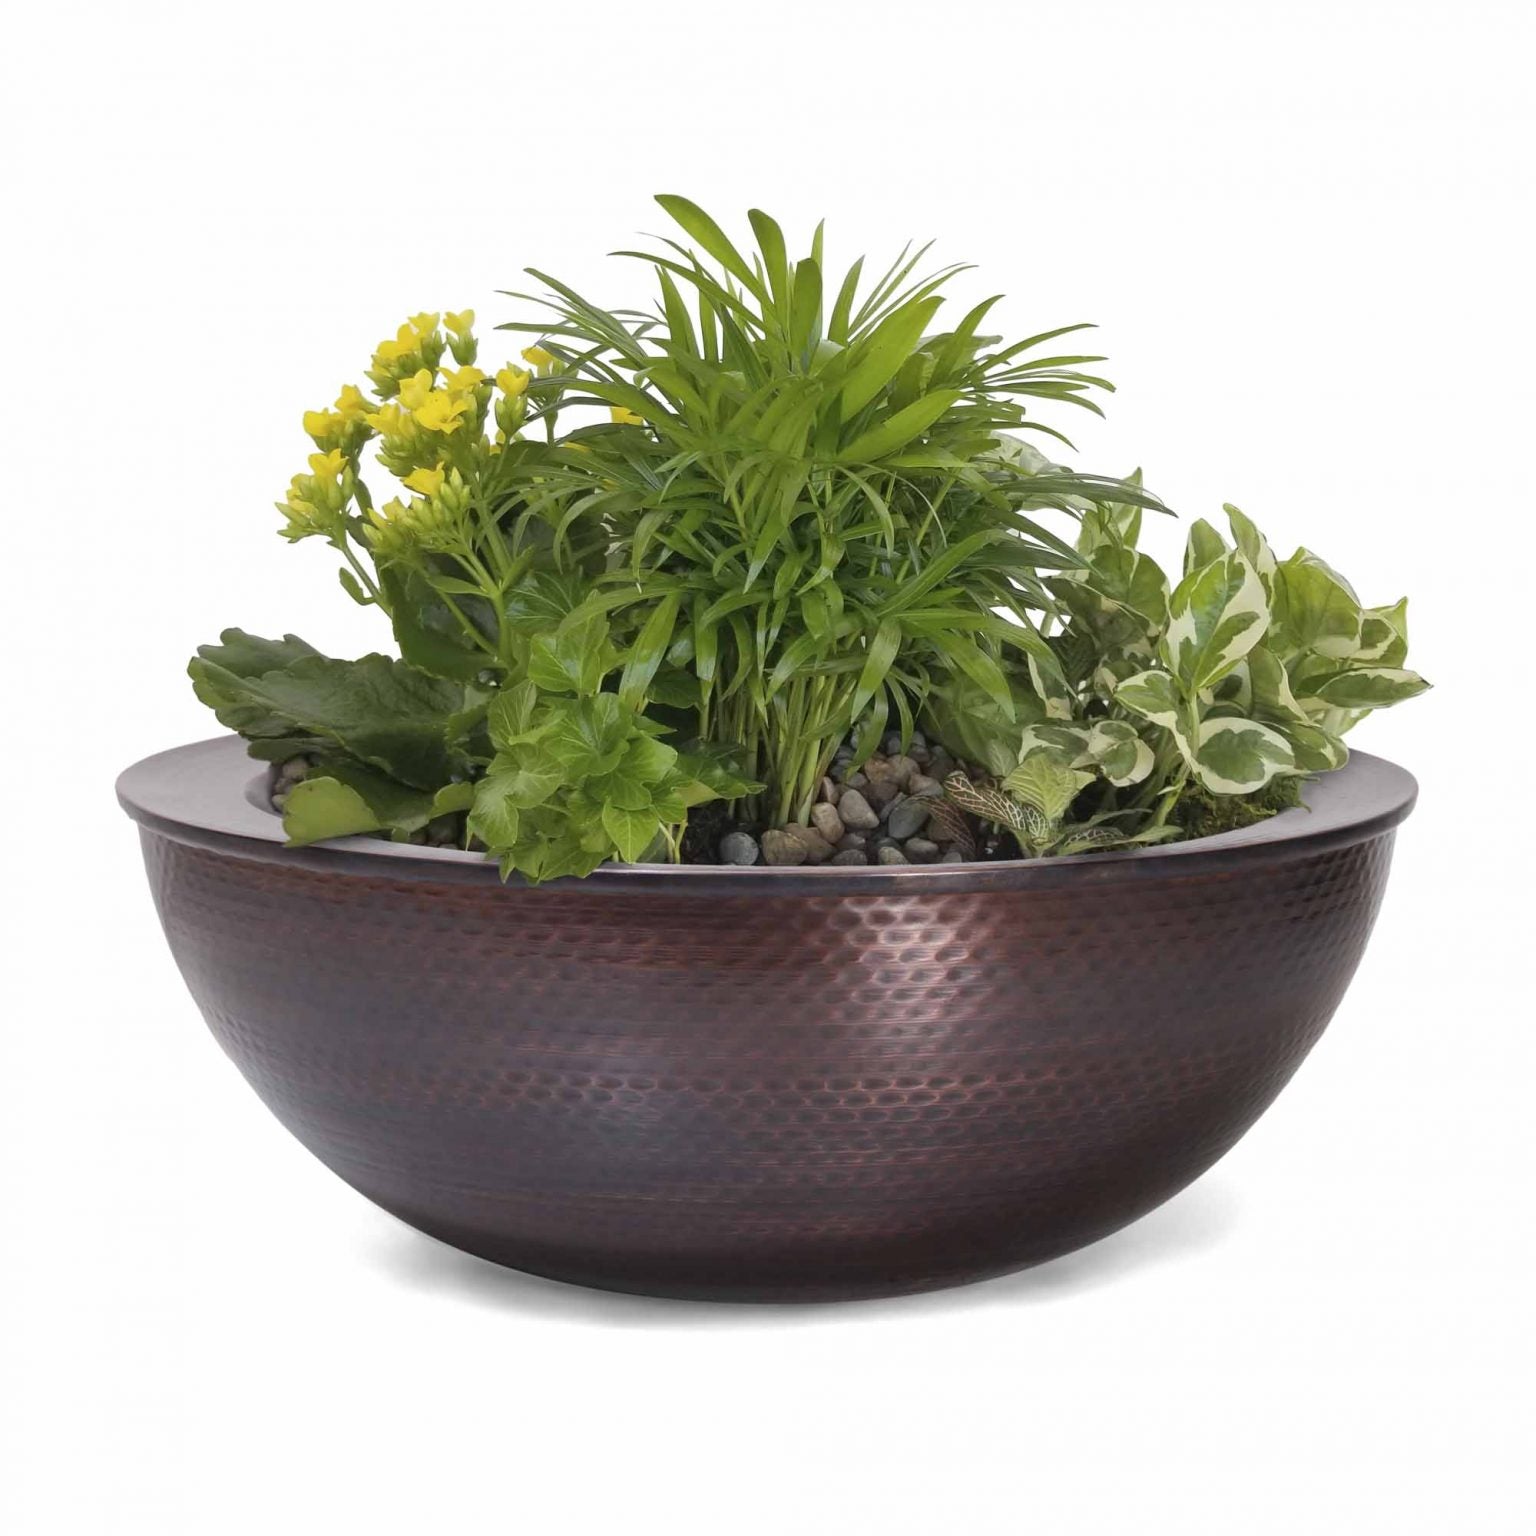 The Outdoor Plus Sedona Planter Bowl Hammered Copper OPT-27RCPRPO - Serenity Provision